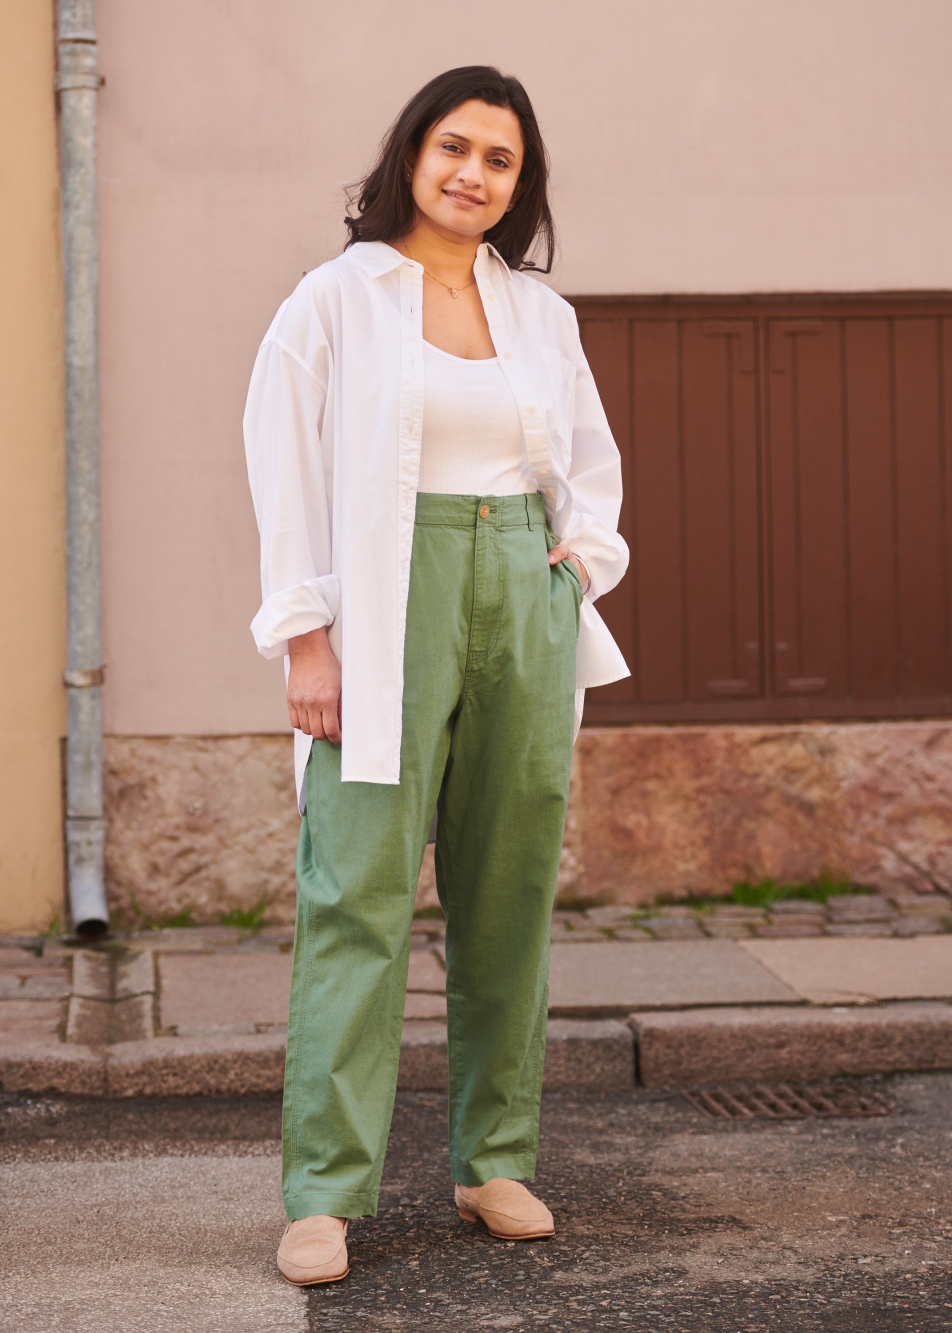 Check styling ideas for「Linen Cotton Tapered Pants、Mesh Leather Belt」